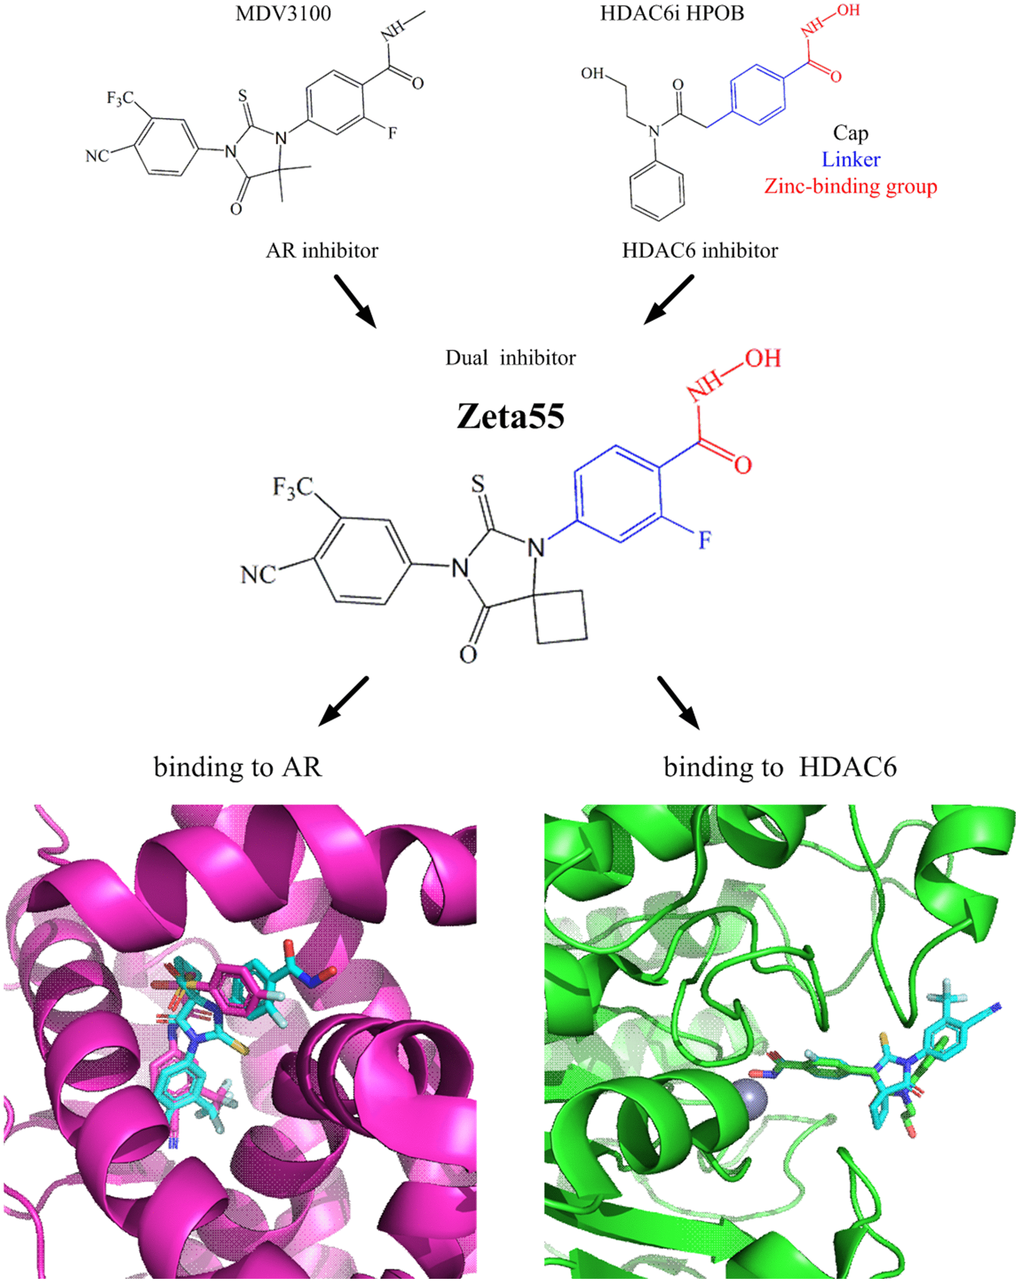 Design of Zeta55 as a dual inhibitor against AR and HDAC6. Top left, chemical structures of MDV310; top right, chemical structures of HDAC6 inhibitor HPOB; middle, chemical structure of Zeta55; bottom left, docking of AR with Zeta55 and Bicalutamide; bottom right, docking of HDAC6 with Zeta55 and HPOB. Proteins were presented in cartoon and small molecules were presented in stick. AR/Bicalutamide were colored in mega, Zeta55 was colored in cyan, HDAC6/HPOB were colored in green.